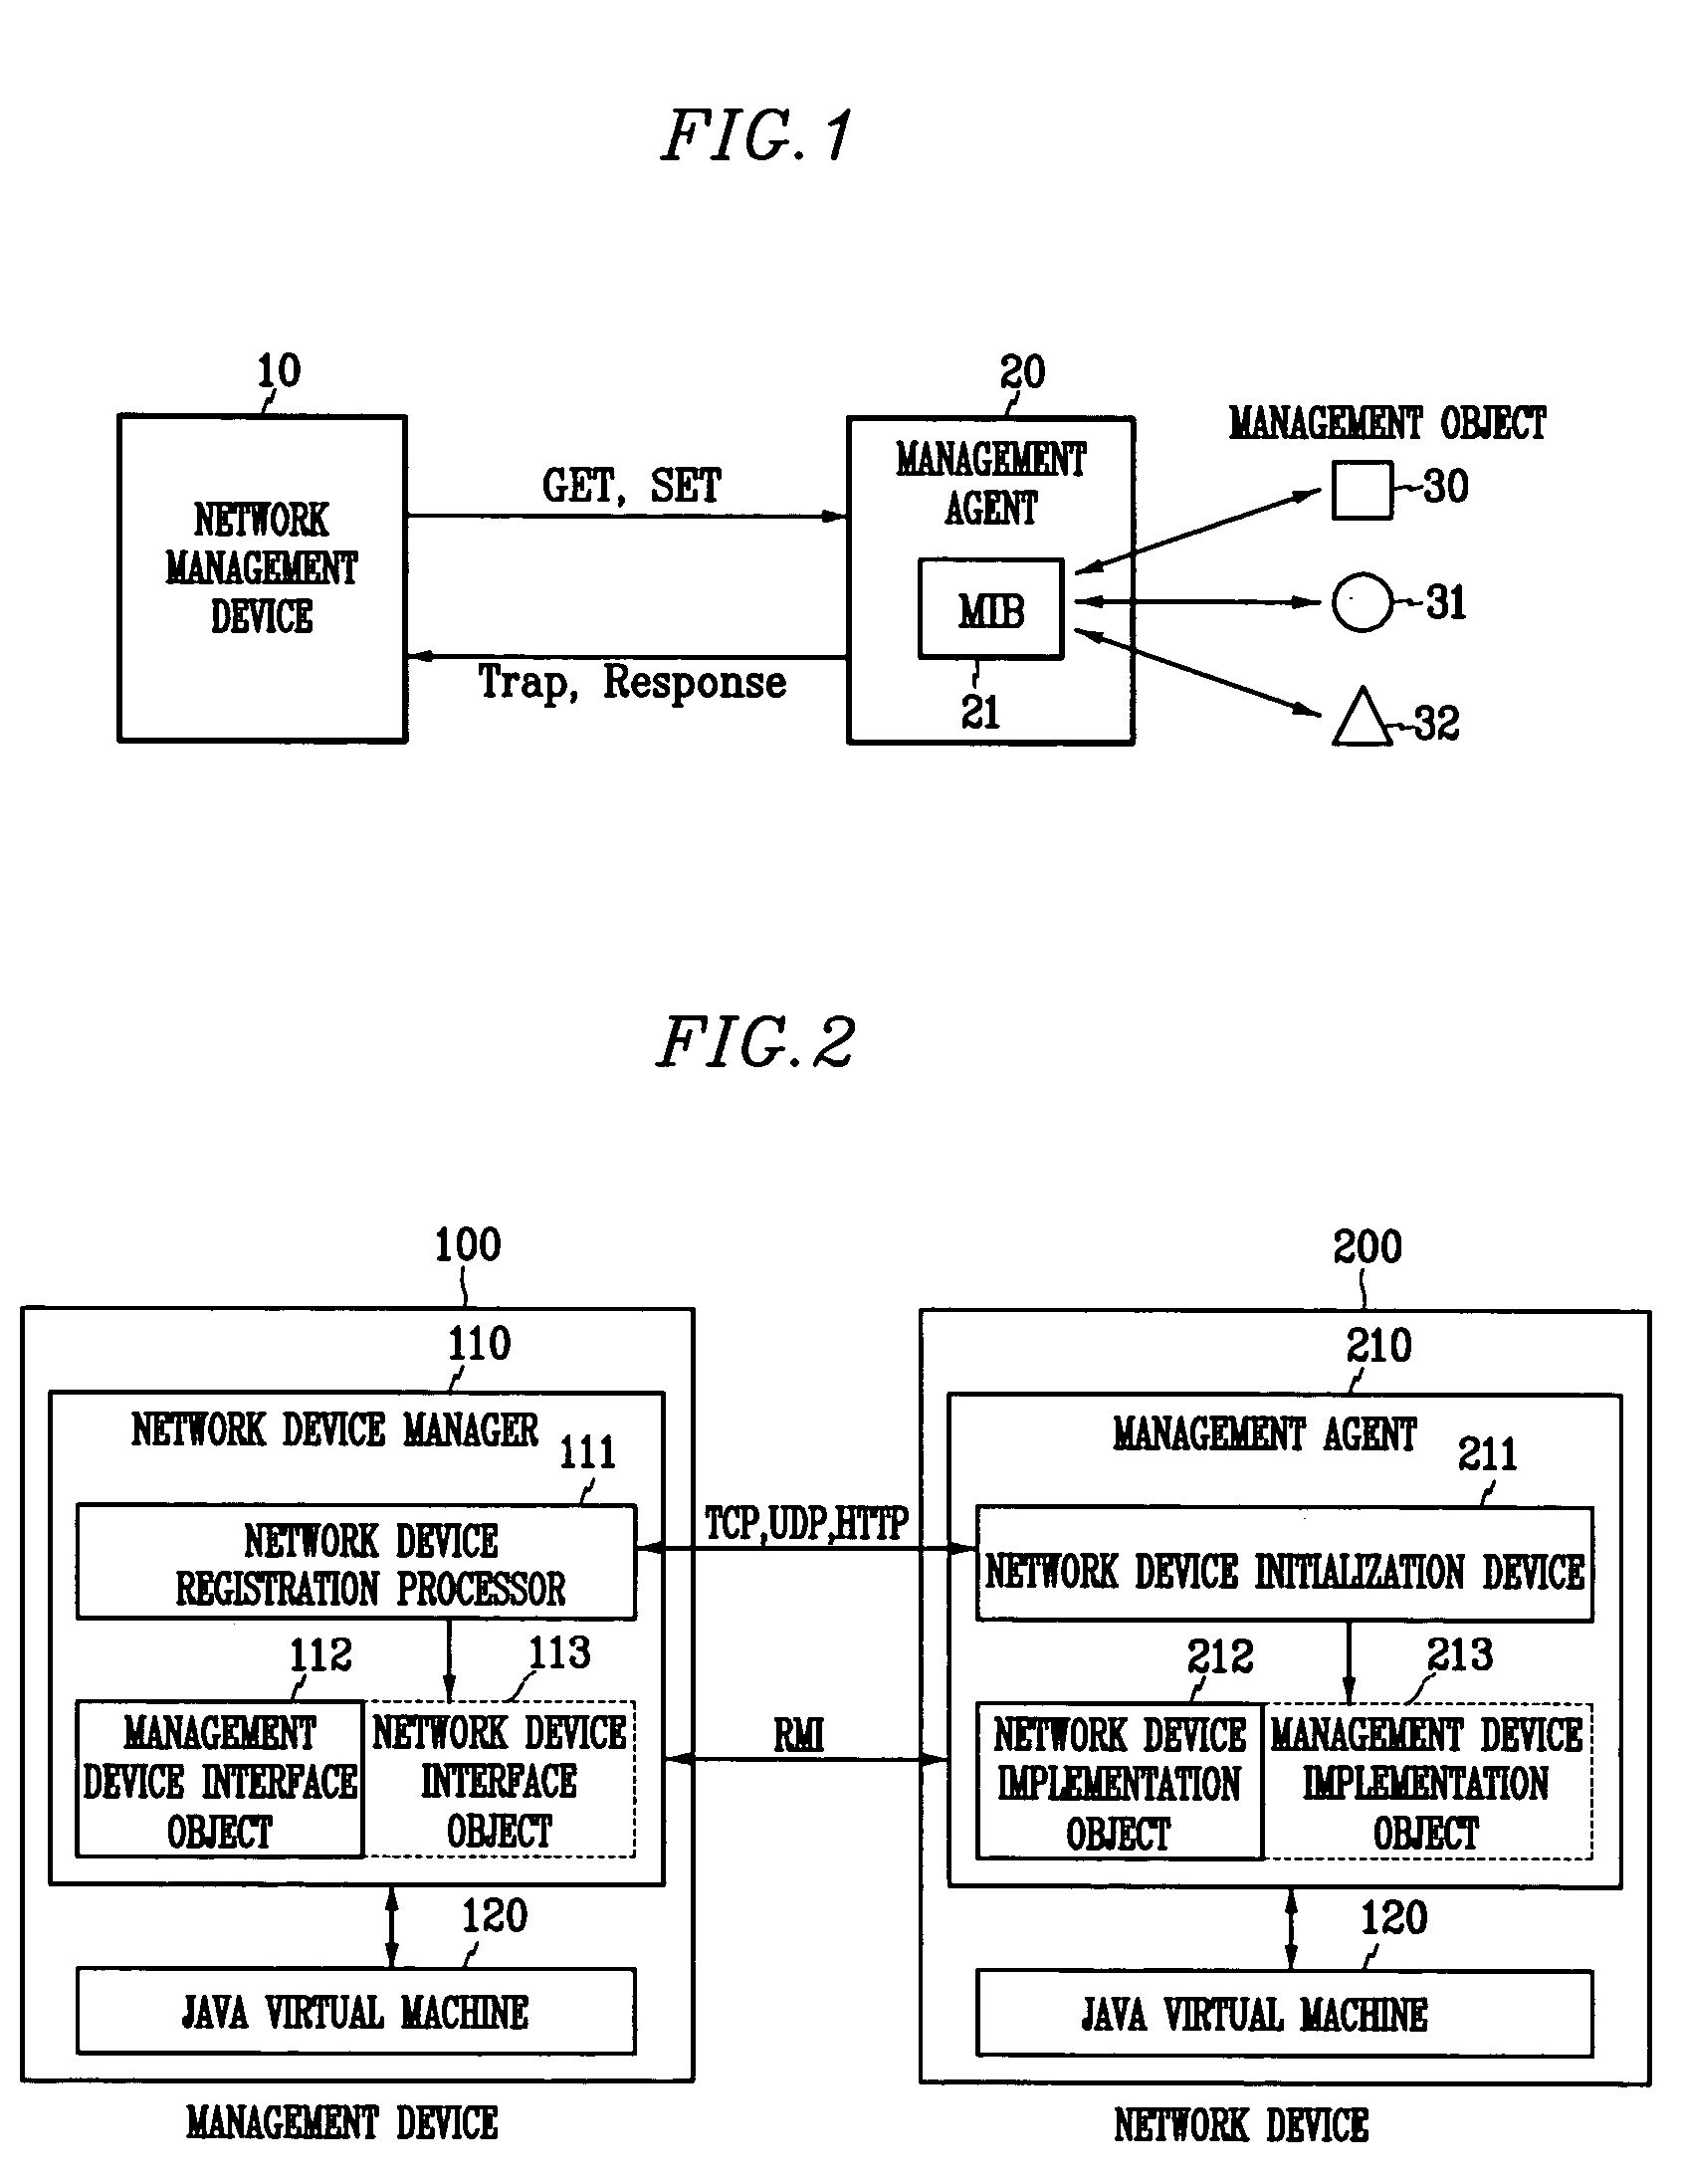 Apparatus and method for managing network device by updating remote service object dynamically